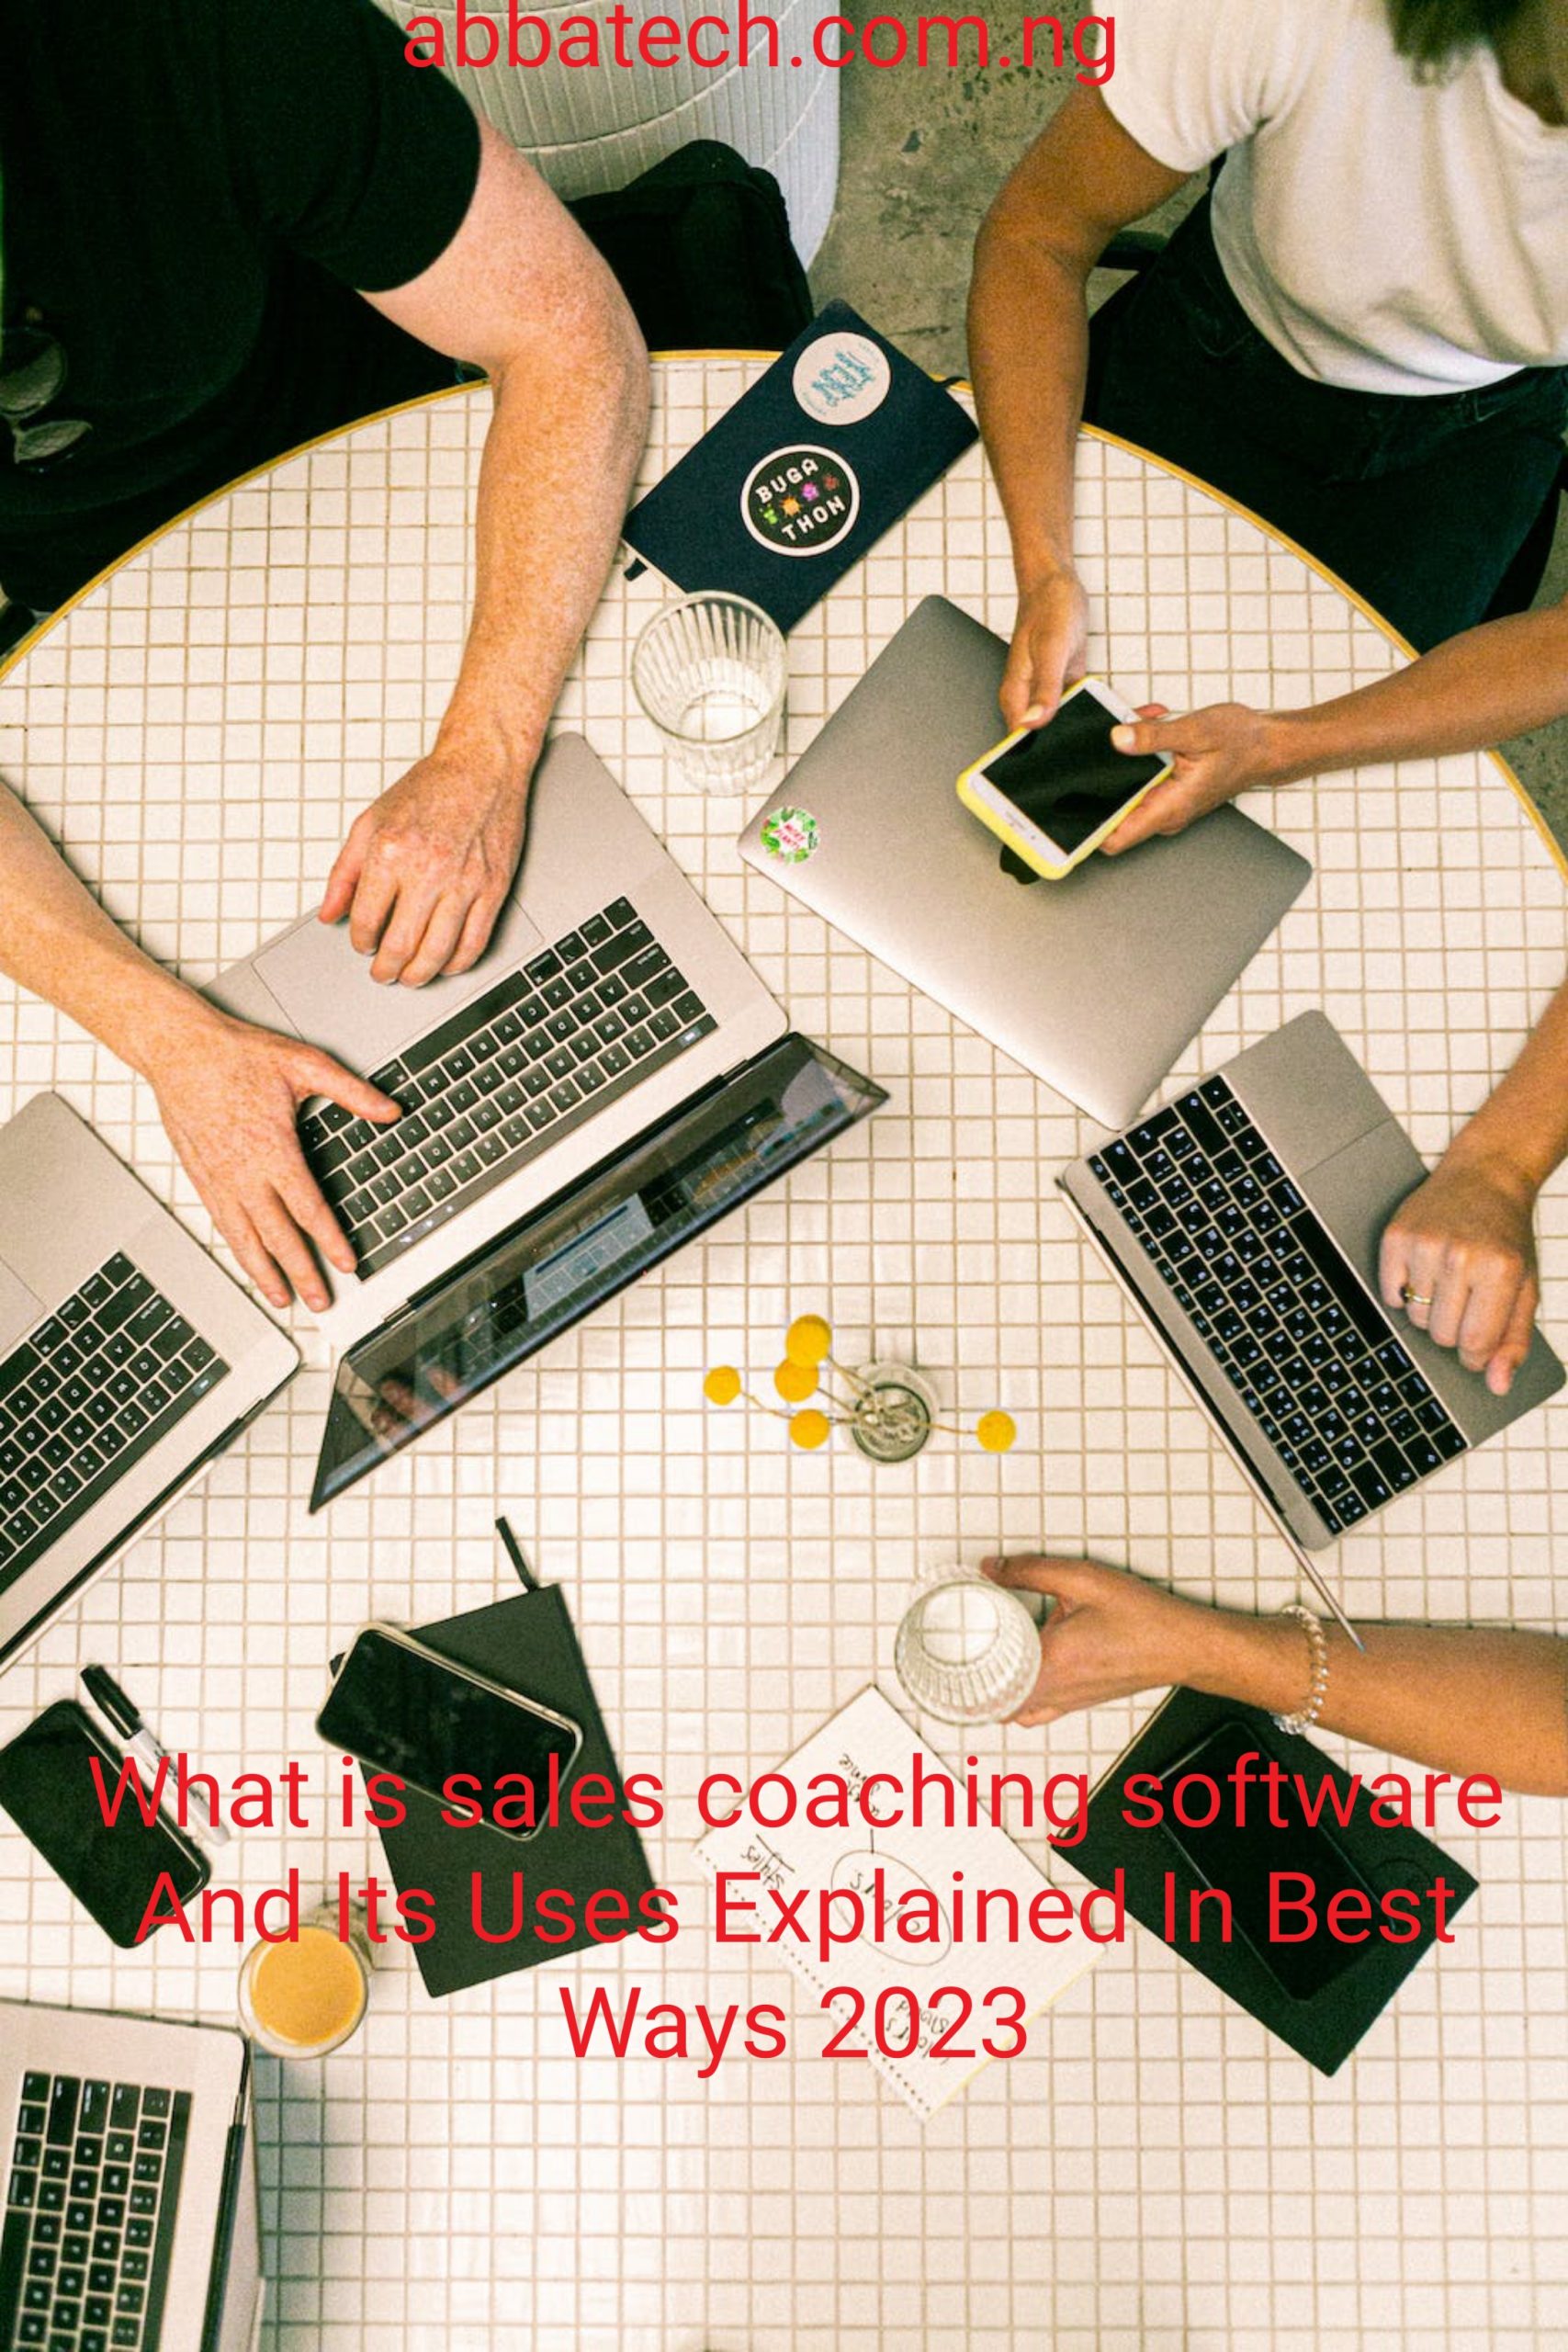 What is sales coaching software And Its Uses Explained In Best Ways 2023